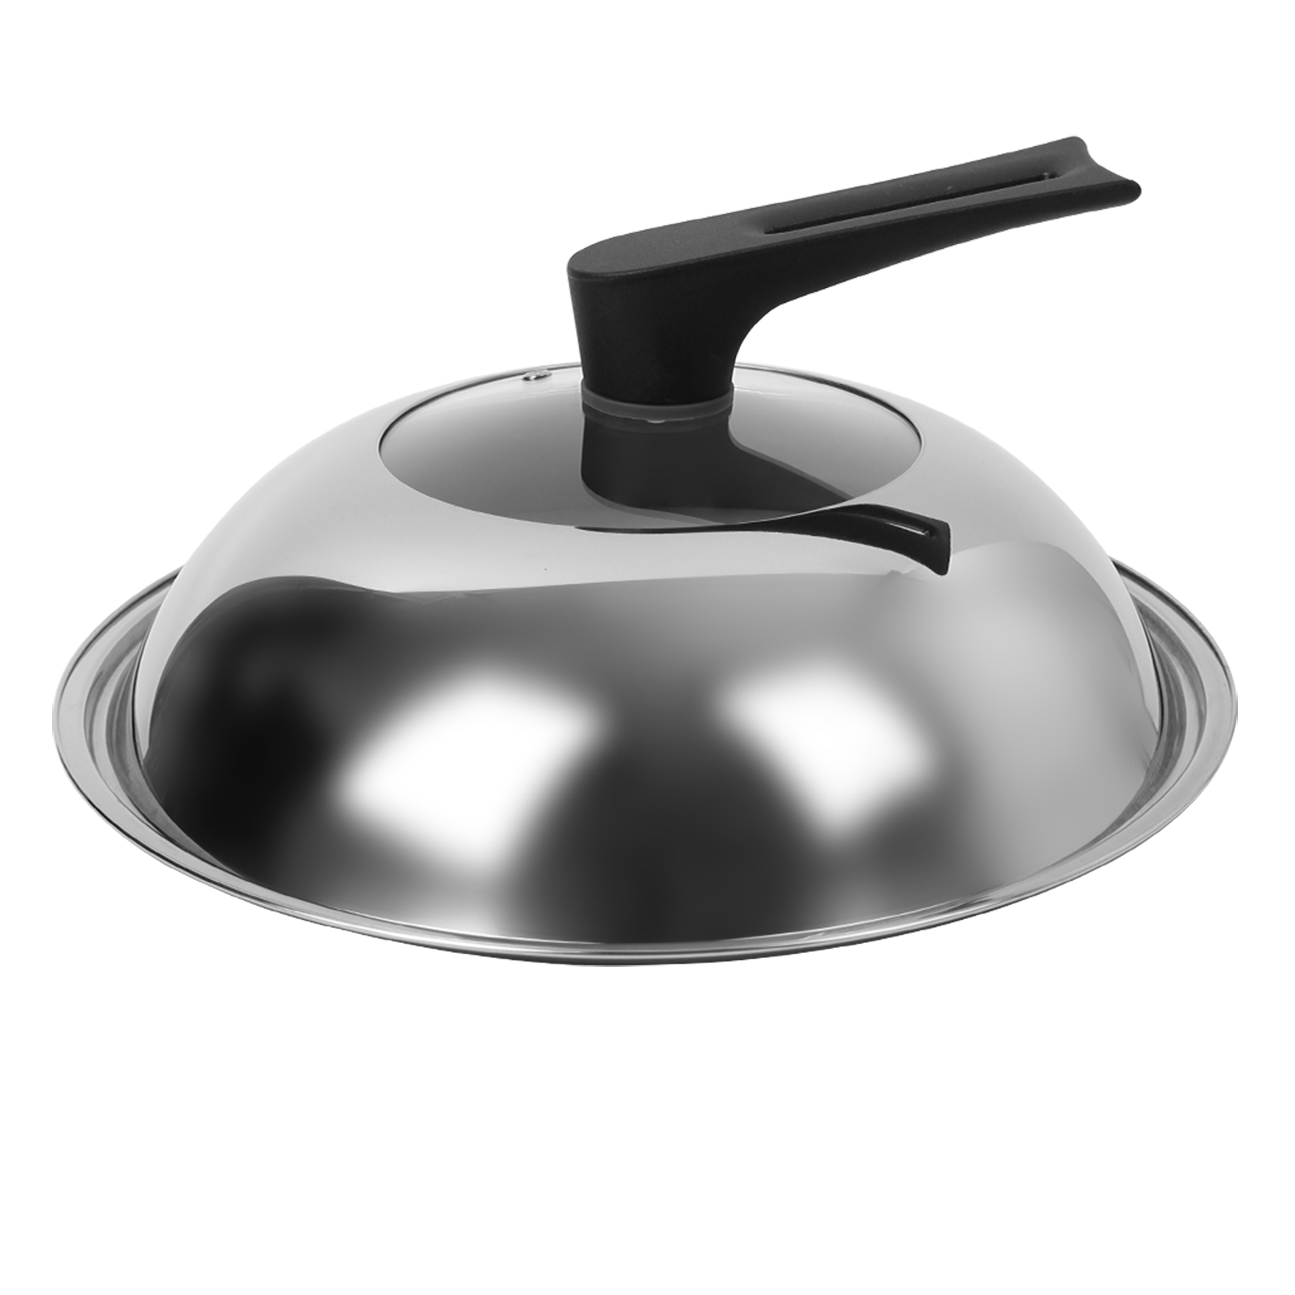 Wok Lid 13.2 Inch Universal Lid, Frying Pot 304 stainless steel lid with a tempered glass window Frying Pot Cover, Cookware Lids Replacement Lid with Handle - Mirror Appearance